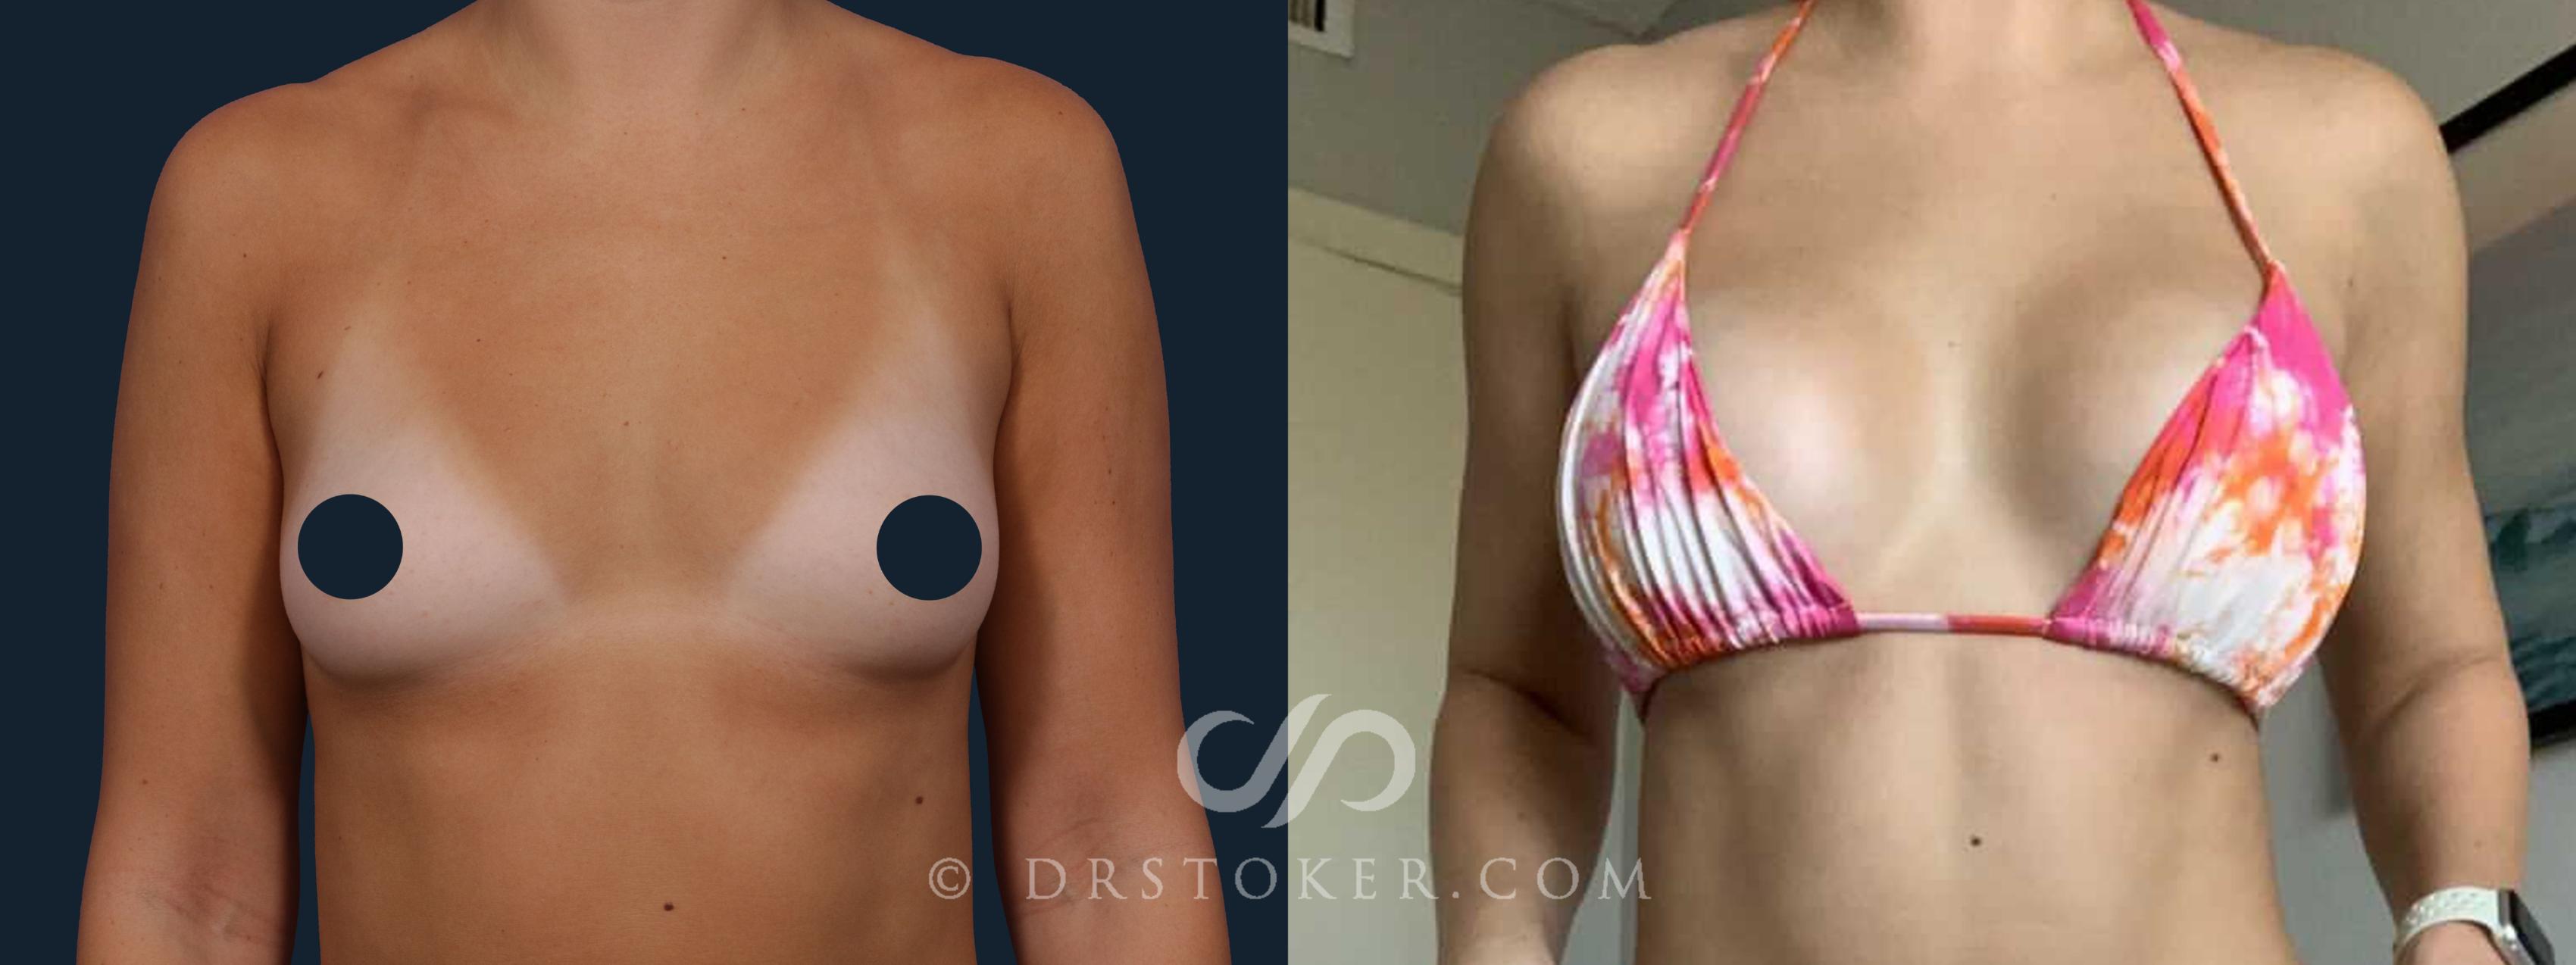 Why Breast Implant Profile Matters, Plastic Surgery in Los Angeles